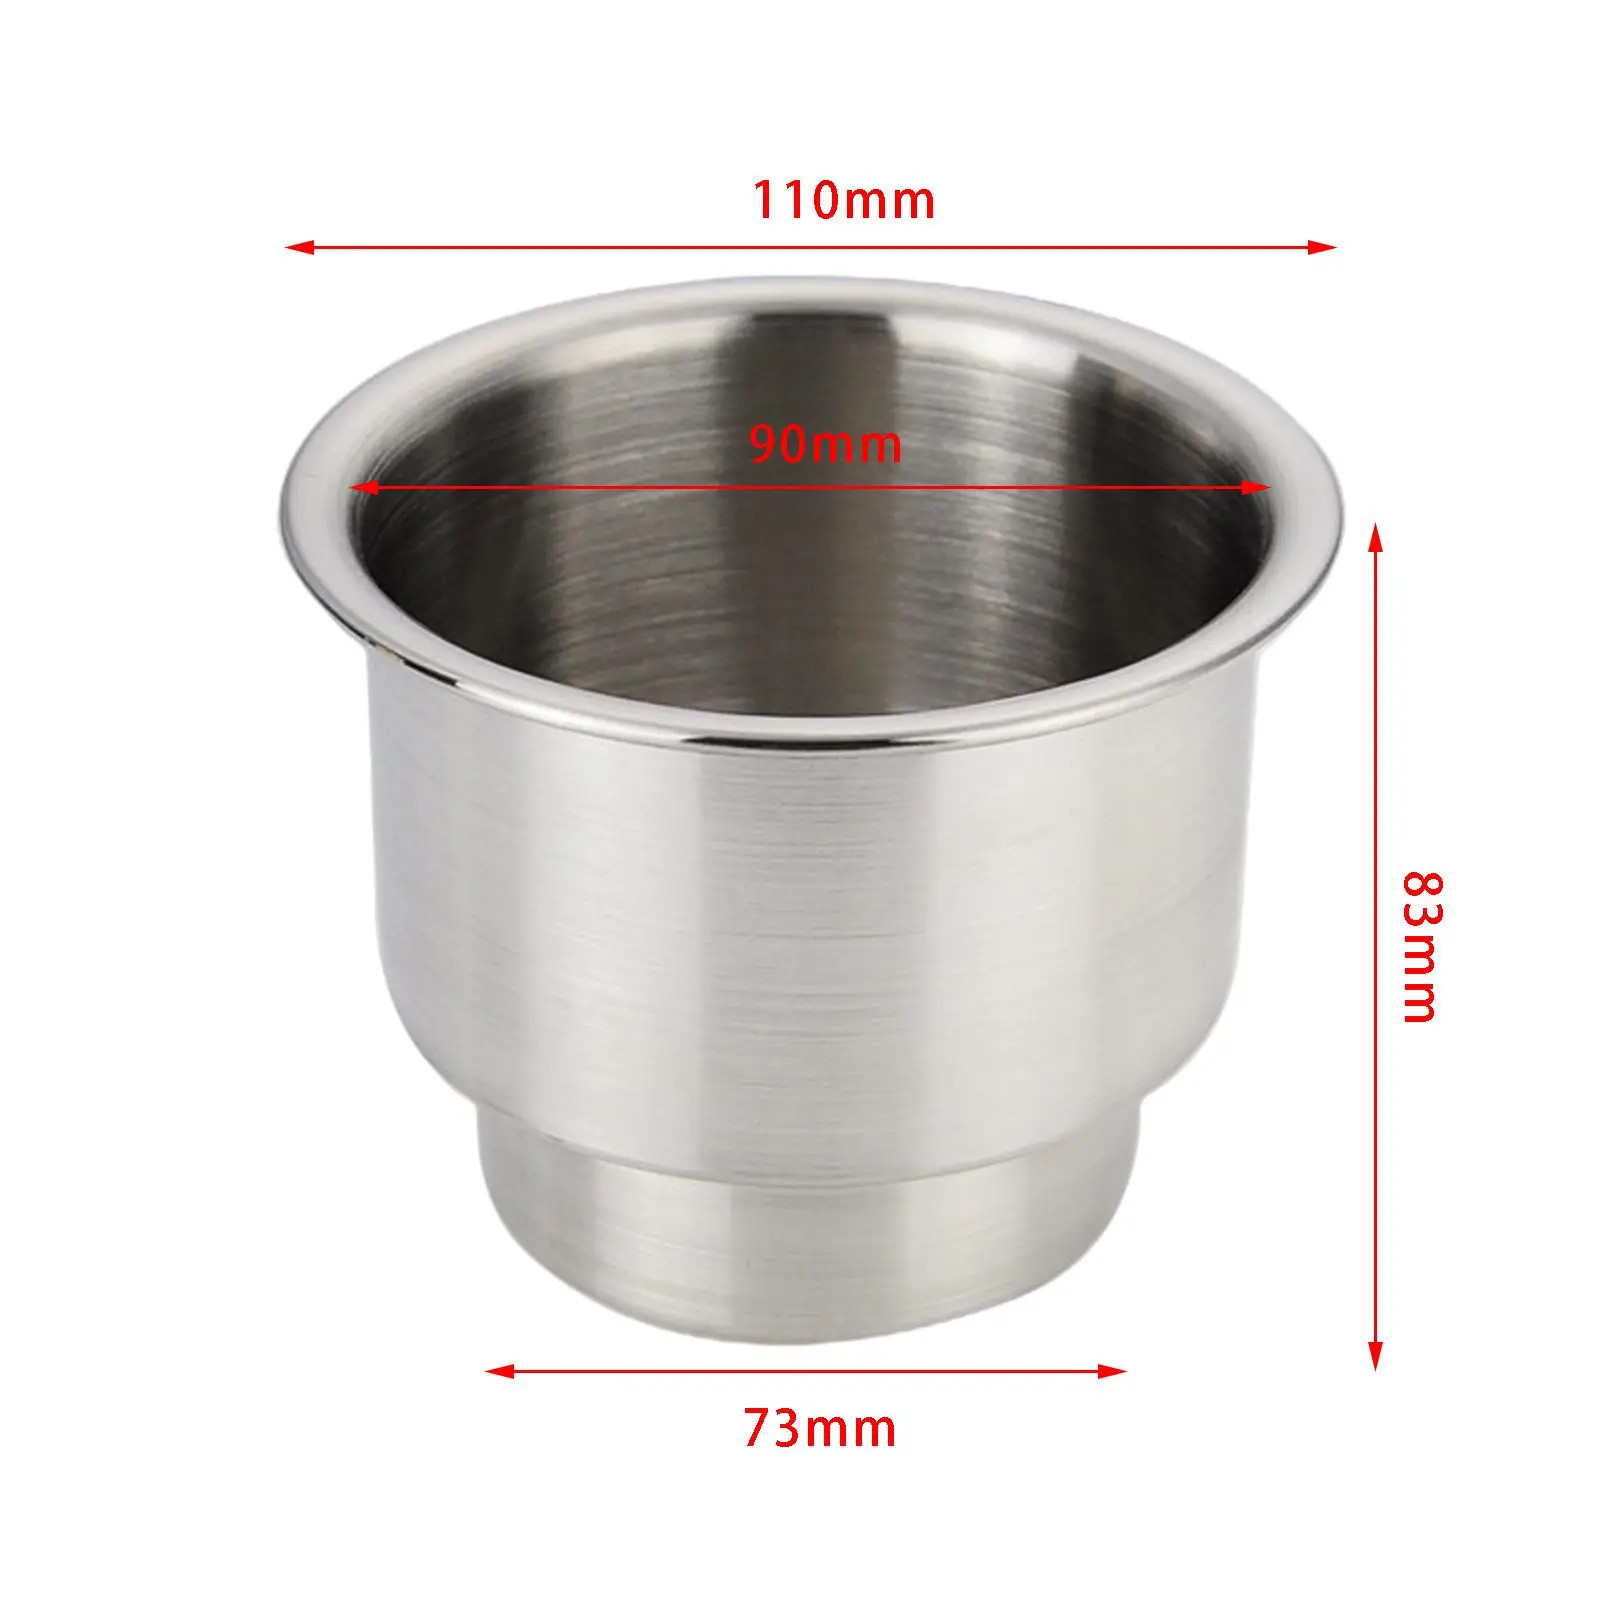 Cup Drink Holder, Stainless Steel, Bottle Holder, Fit for 110x83mm Car Accessories